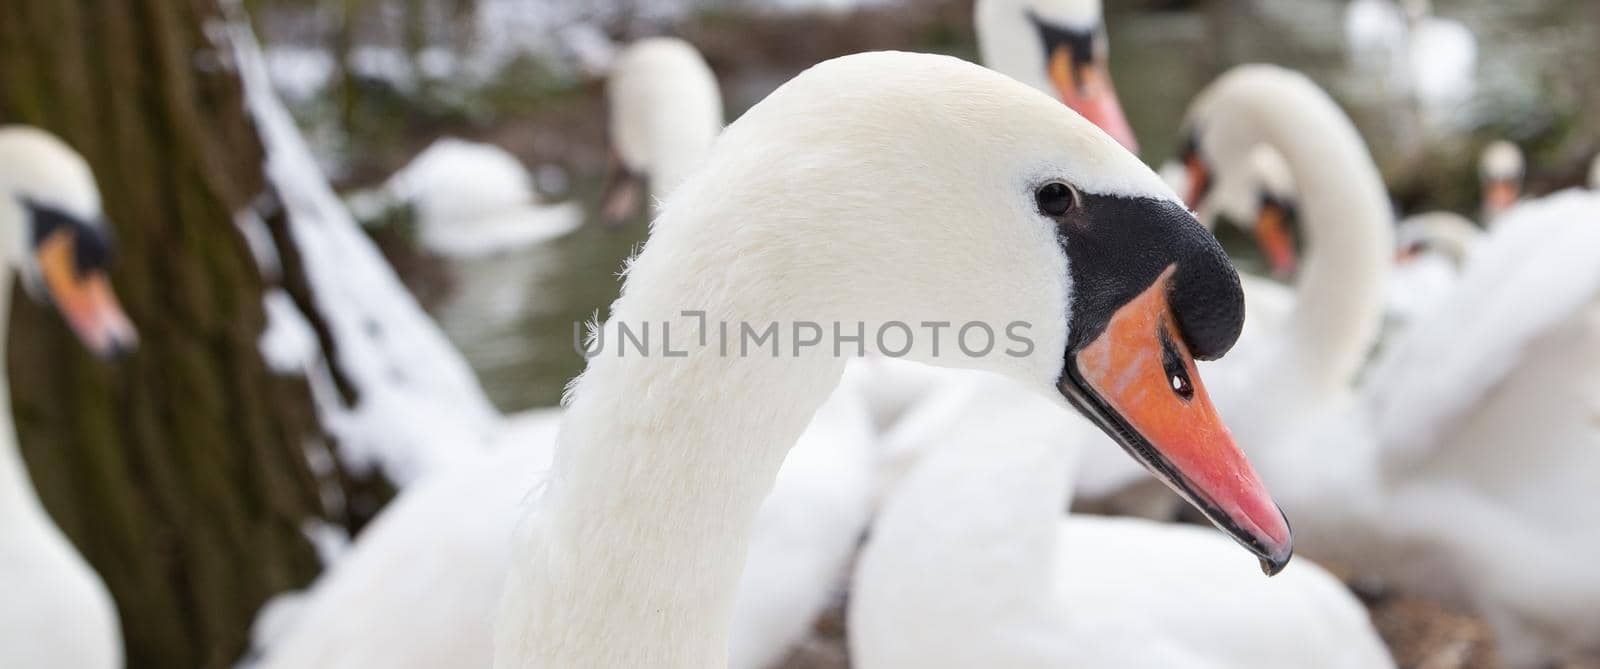 White swan, close up by NelliPolk